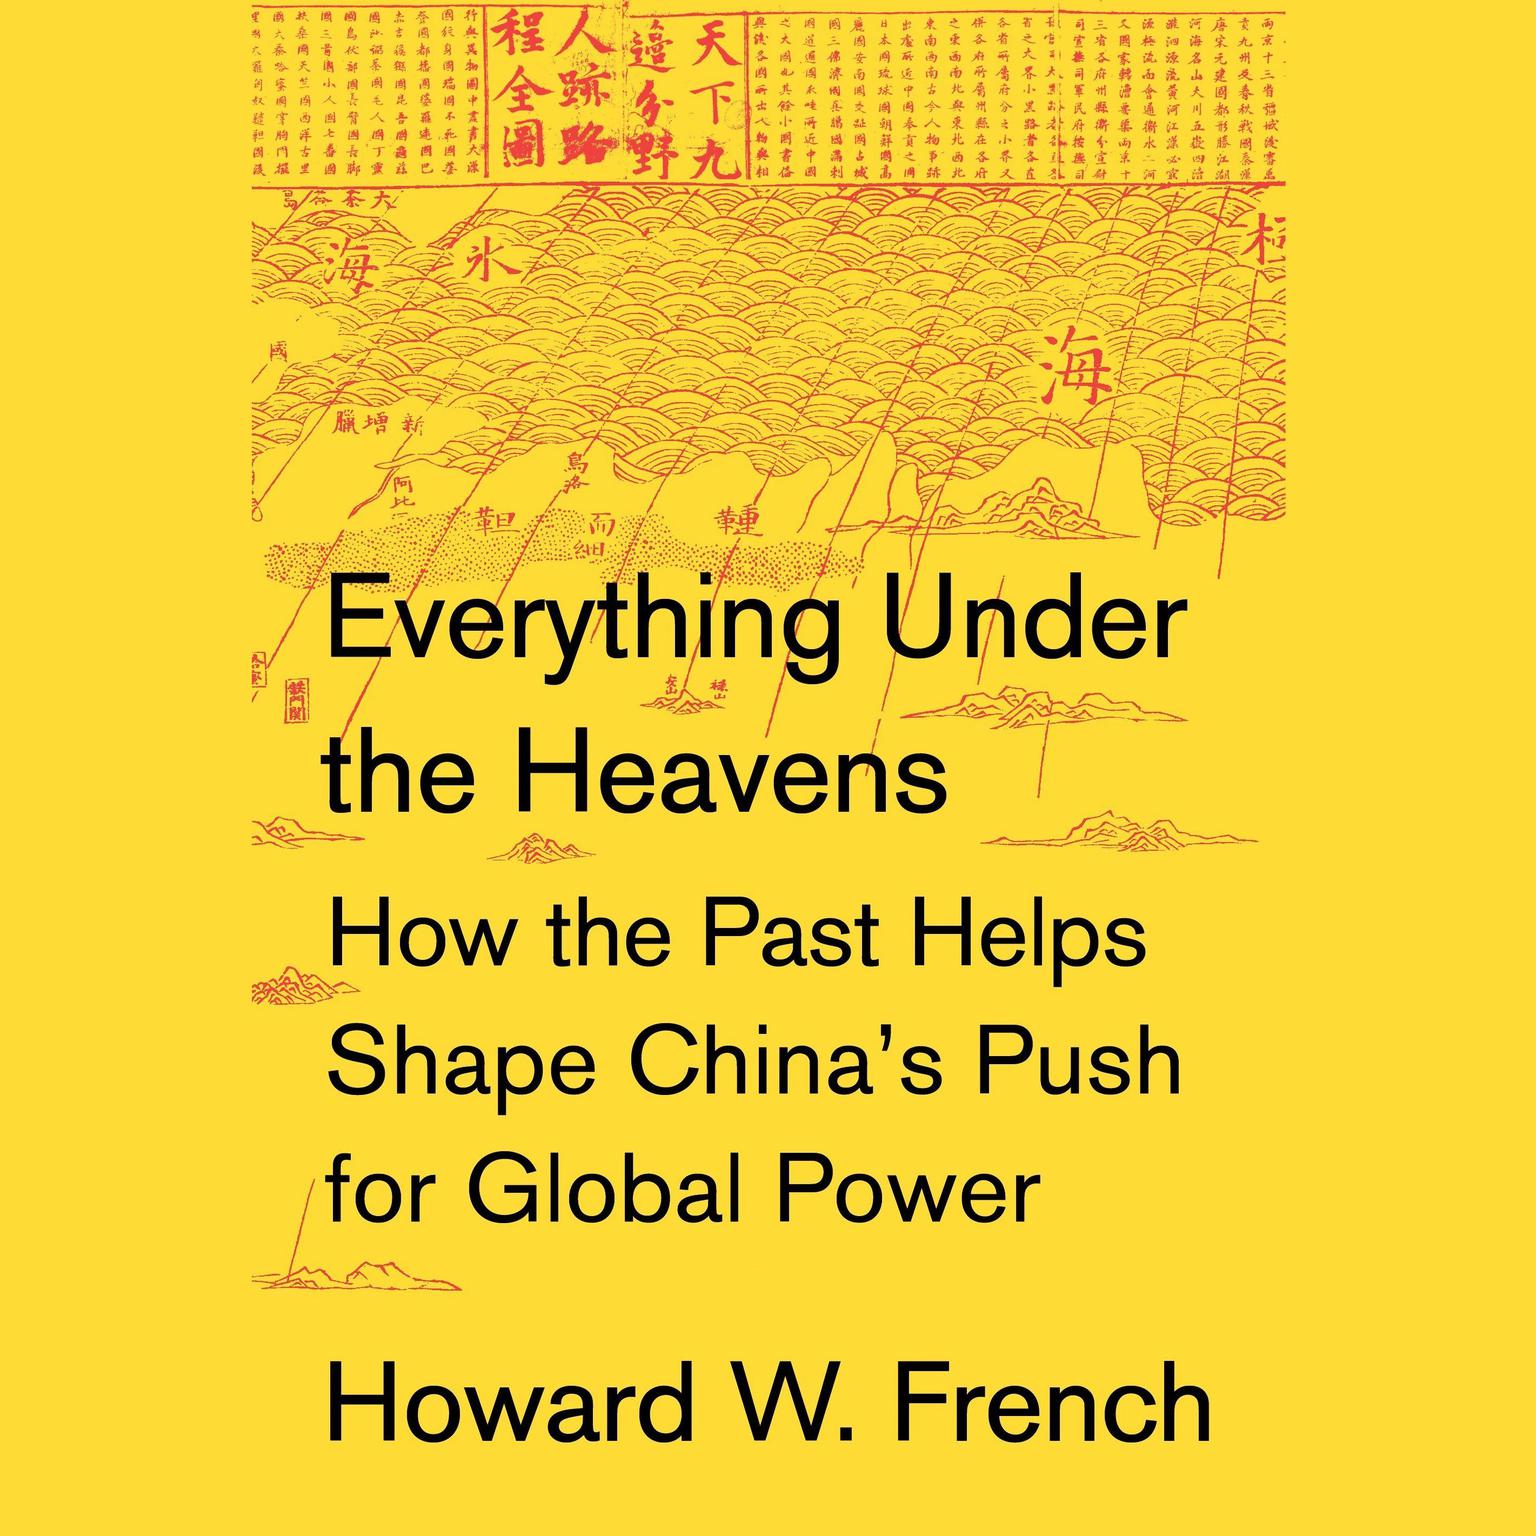 Everything Under the Heavens: How the Past Helps Shape Chinas Push for Global Power Audiobook, by Howard W. French